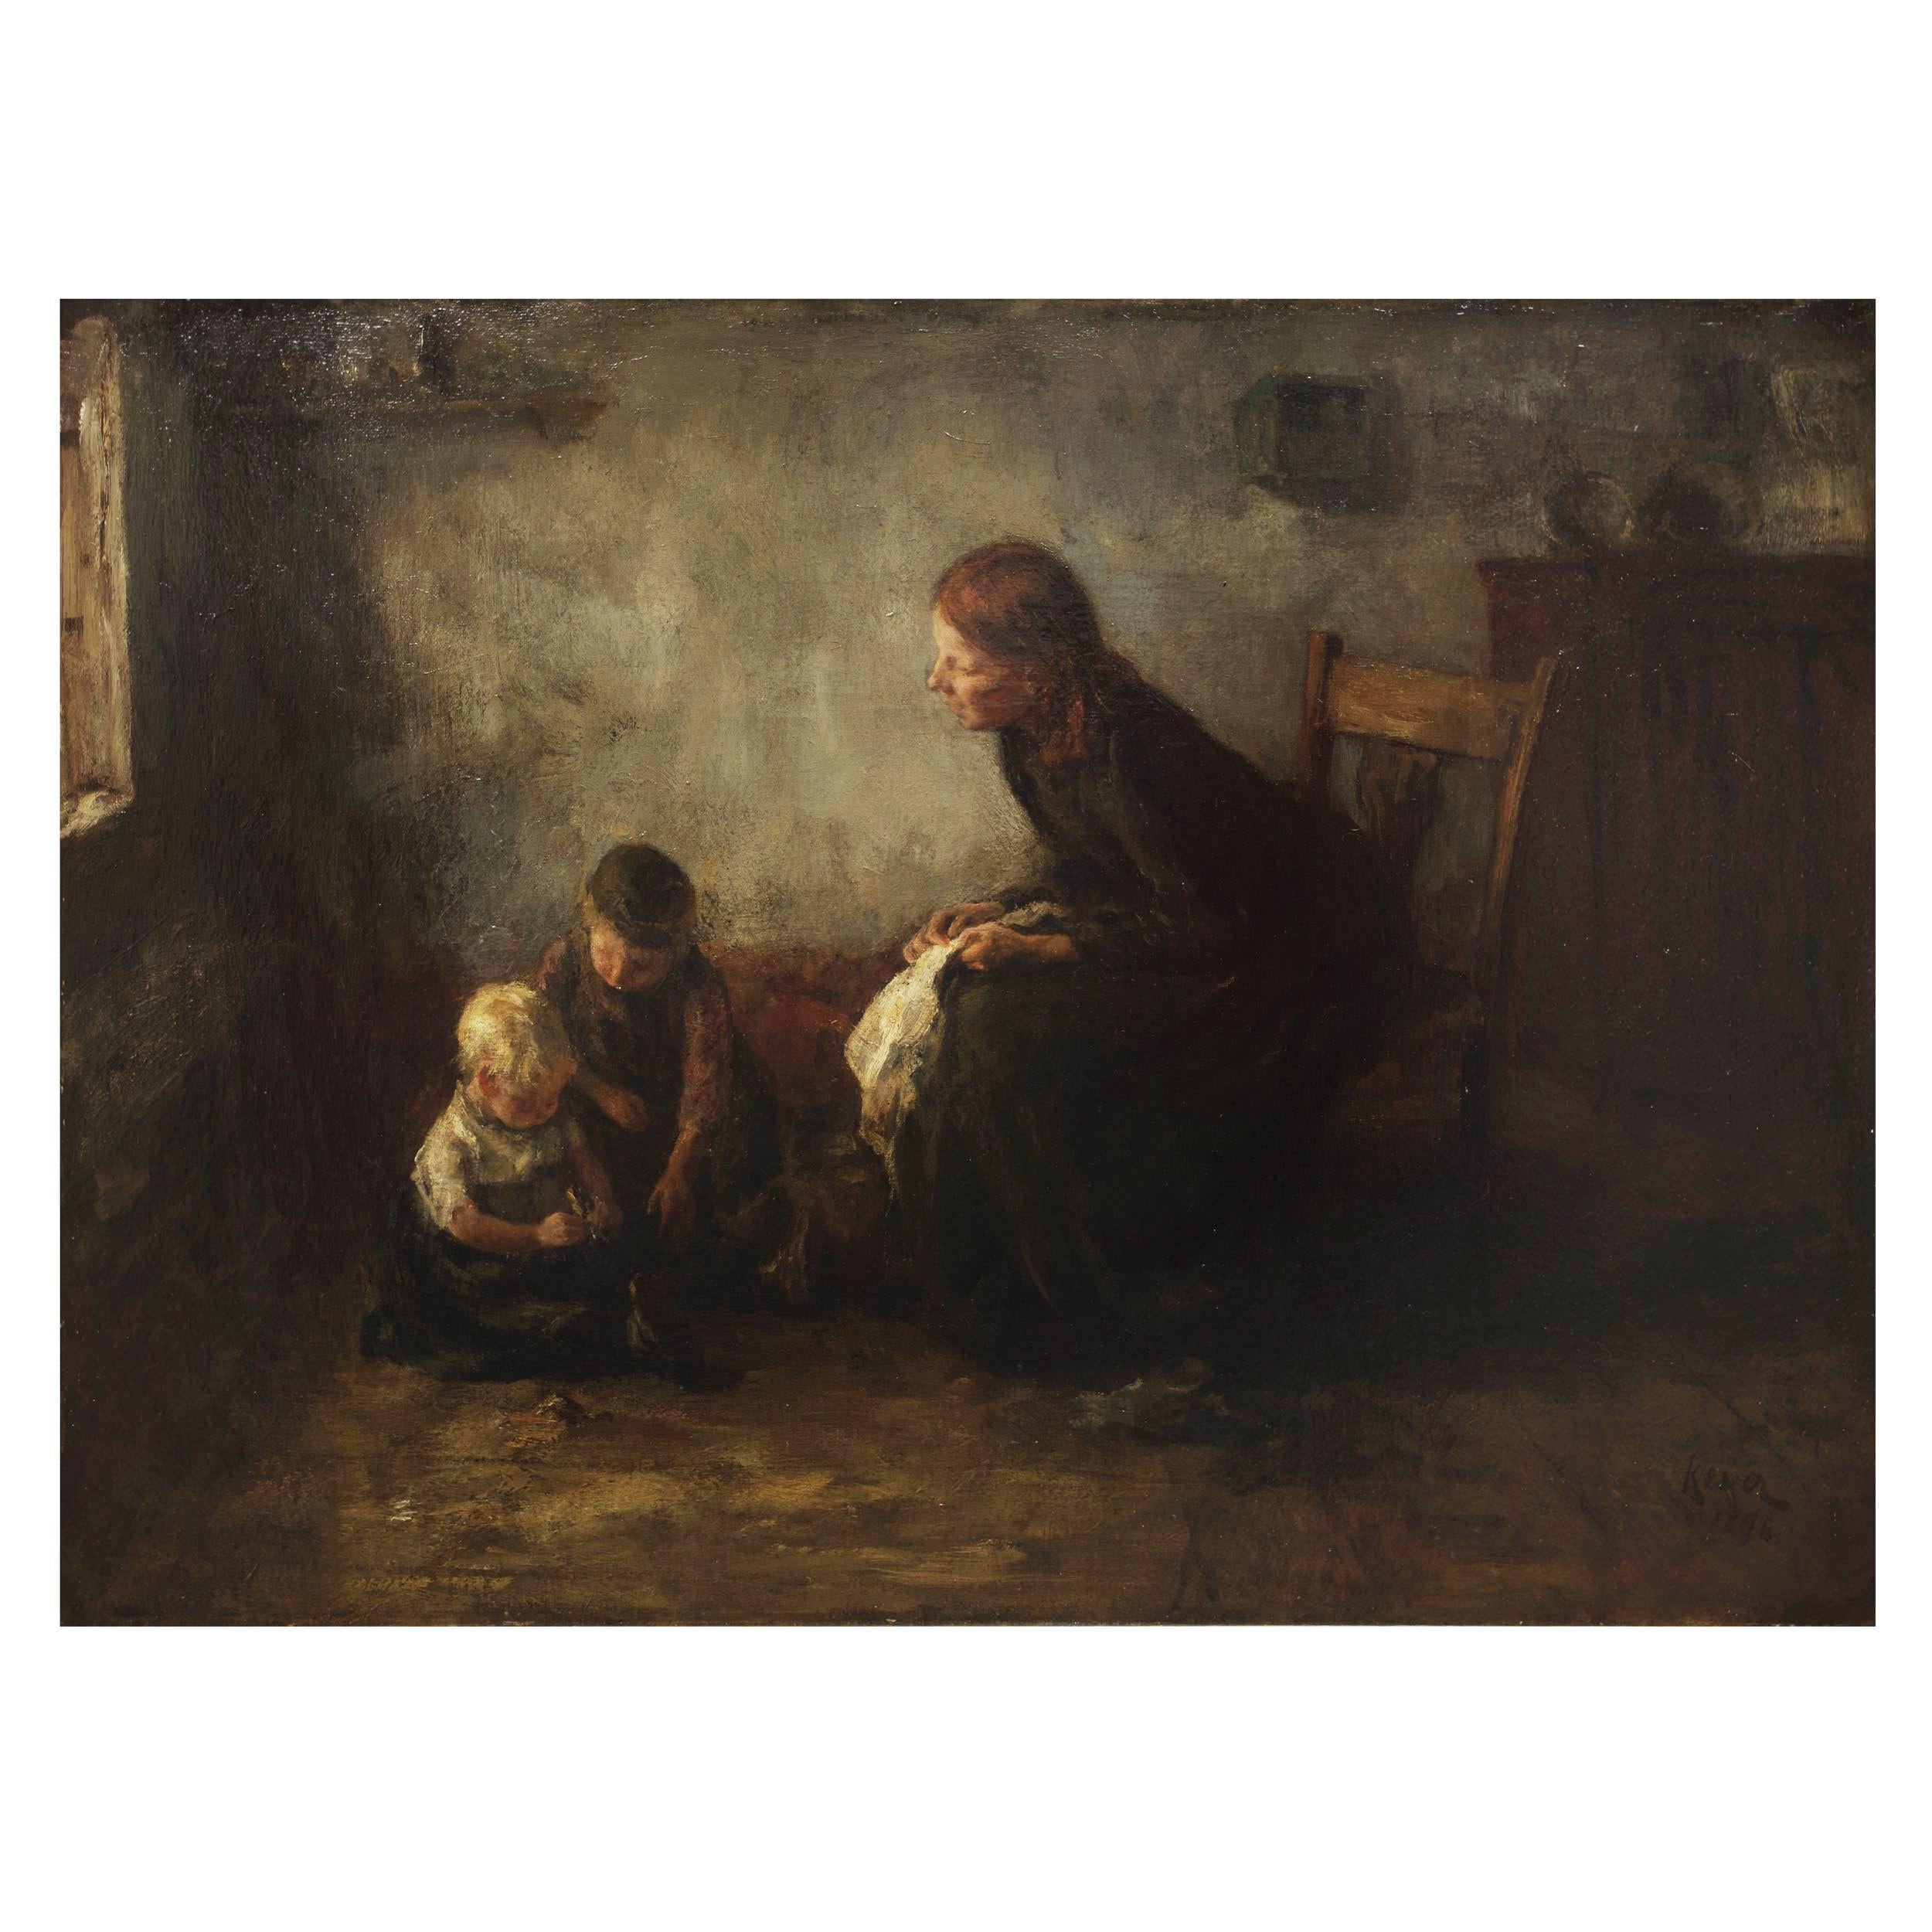 The light of the setting sun breaks across this scene with an intense golden glow, settling across the brilliant blond hair of the seated baby girl on the floor as she plays with a flower in hand. Her brother leans over to help her as her mother